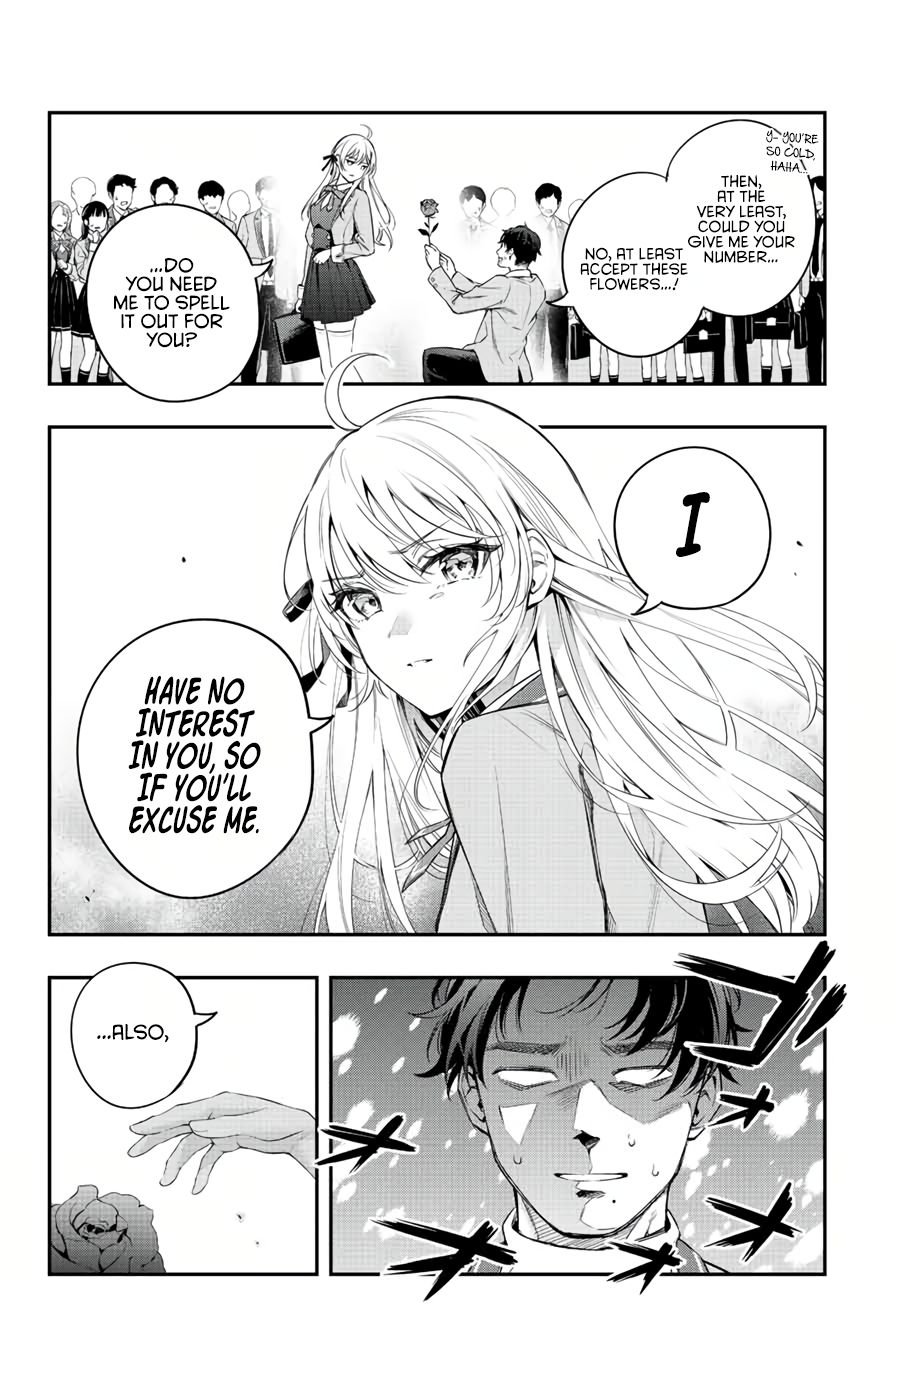 Read Alya Sometimes Hides Her Feelings In Russian Manga English New Chapters Online Free